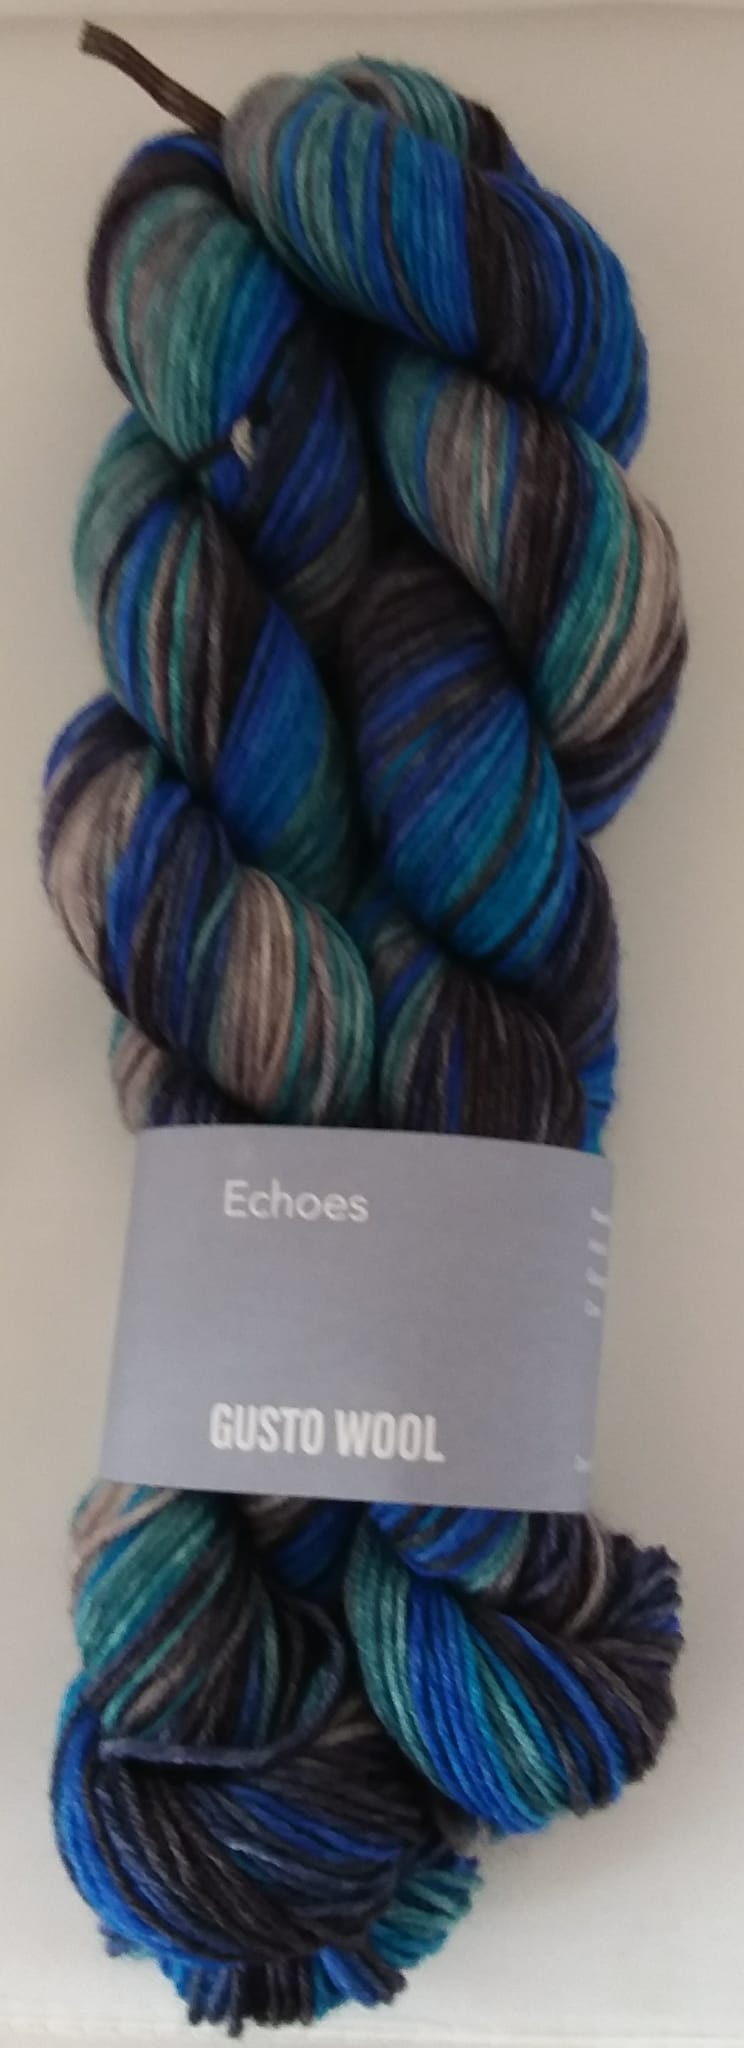 Gusto Wool| Echoes